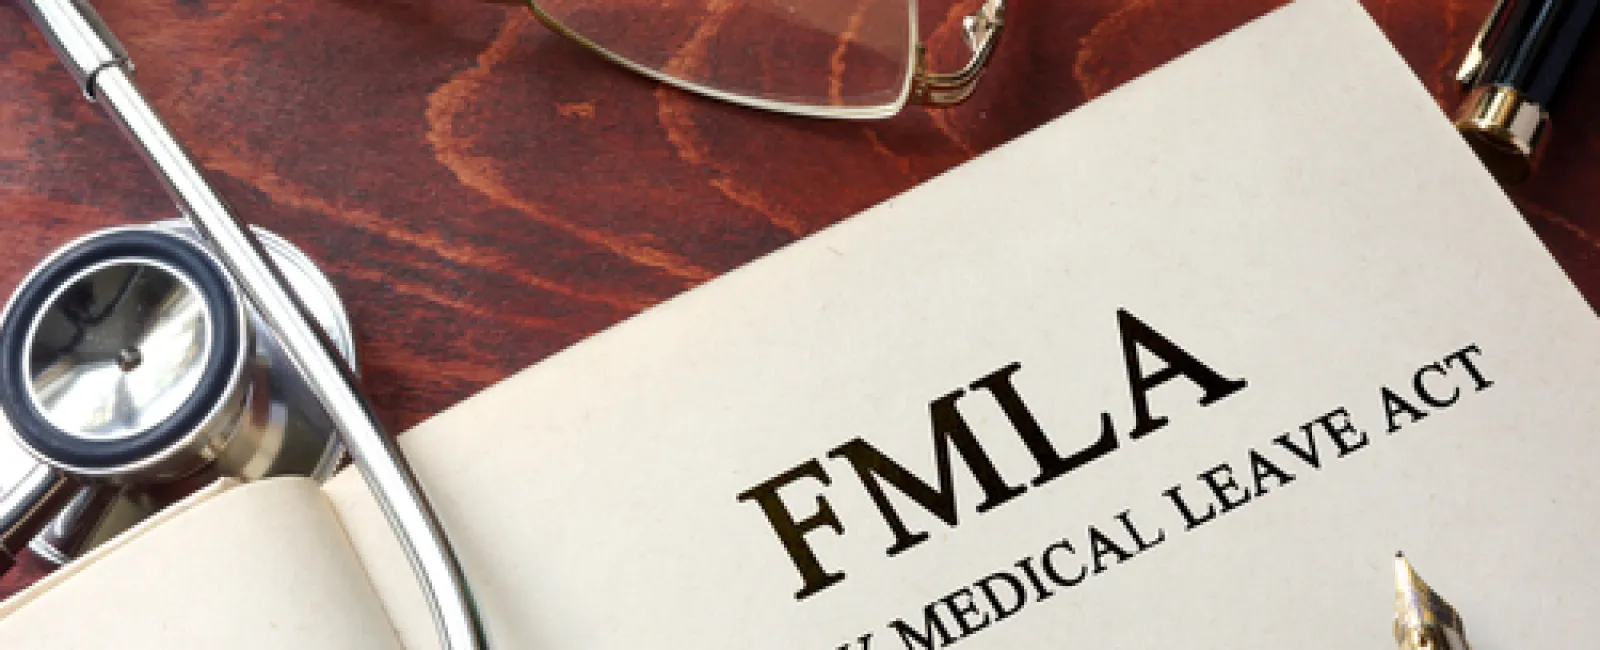 When are Employees Entitled to Leave Under FMLA?